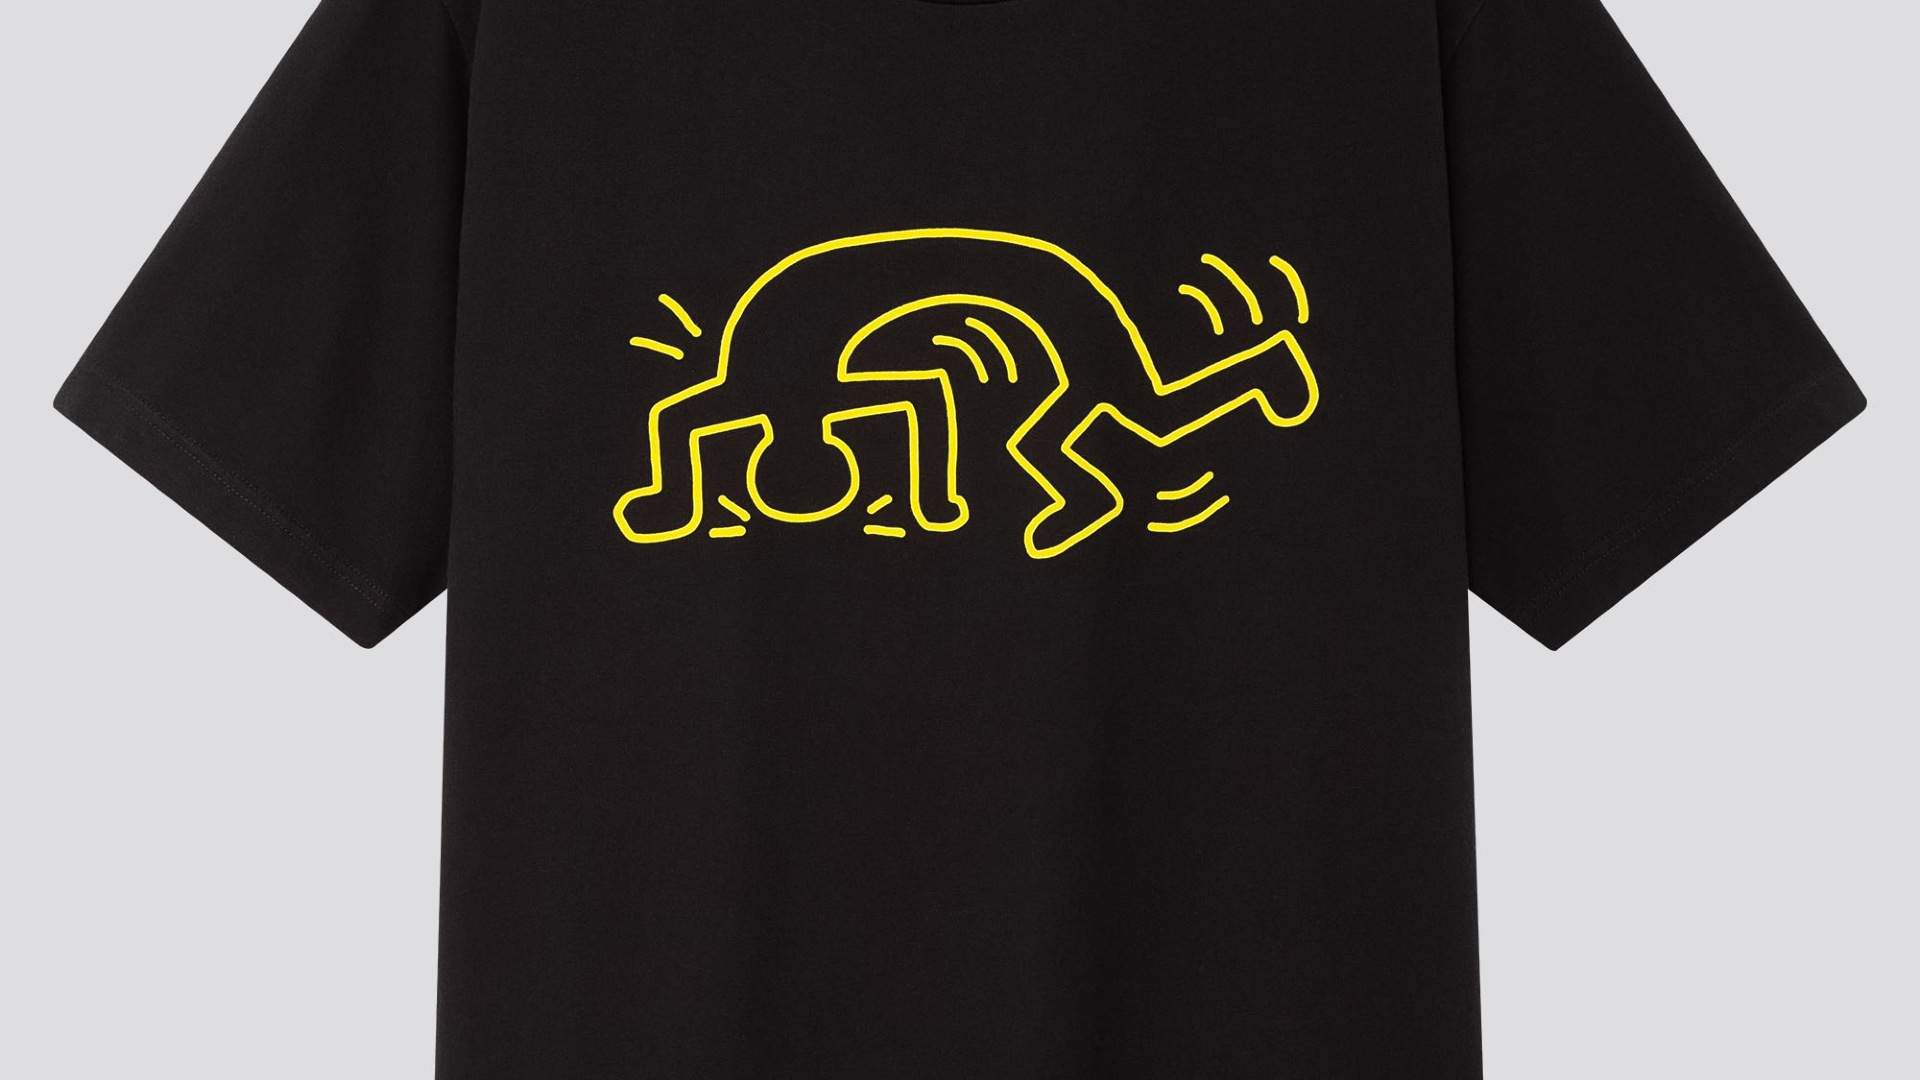 Uniqlo Is Launching a Line of T-Shirts Dedicated to Keith Haring and Jean-Michel Basquiat